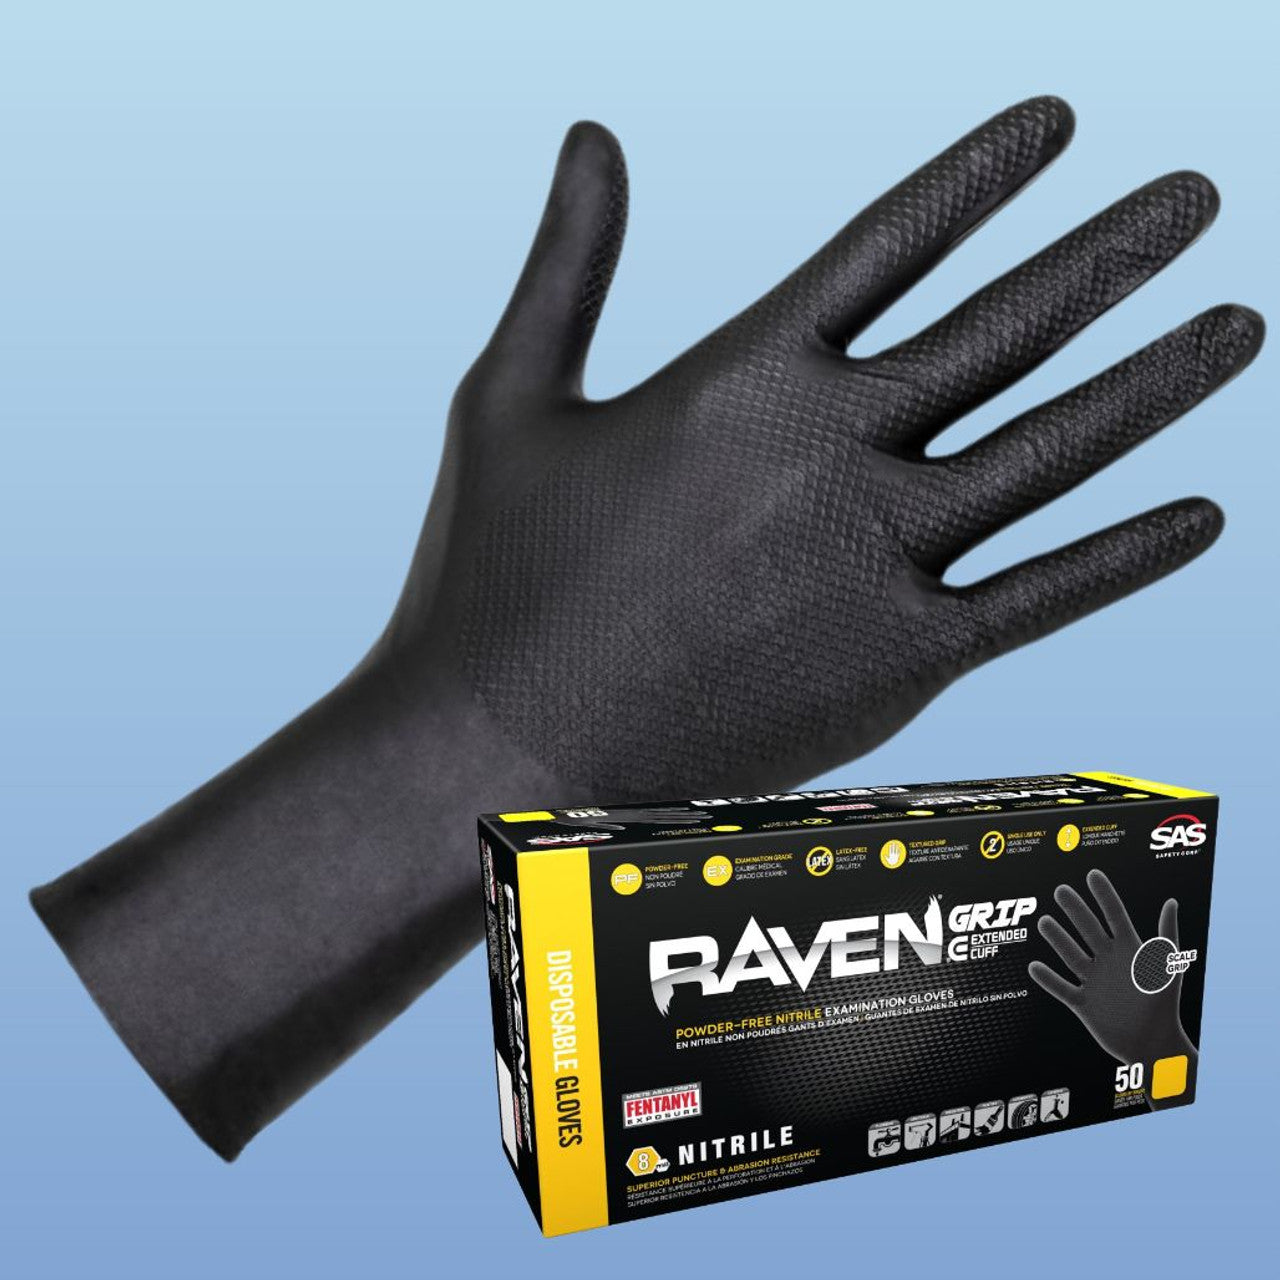 Raven Grip Extended Cuff Nitrile Exam Gloves